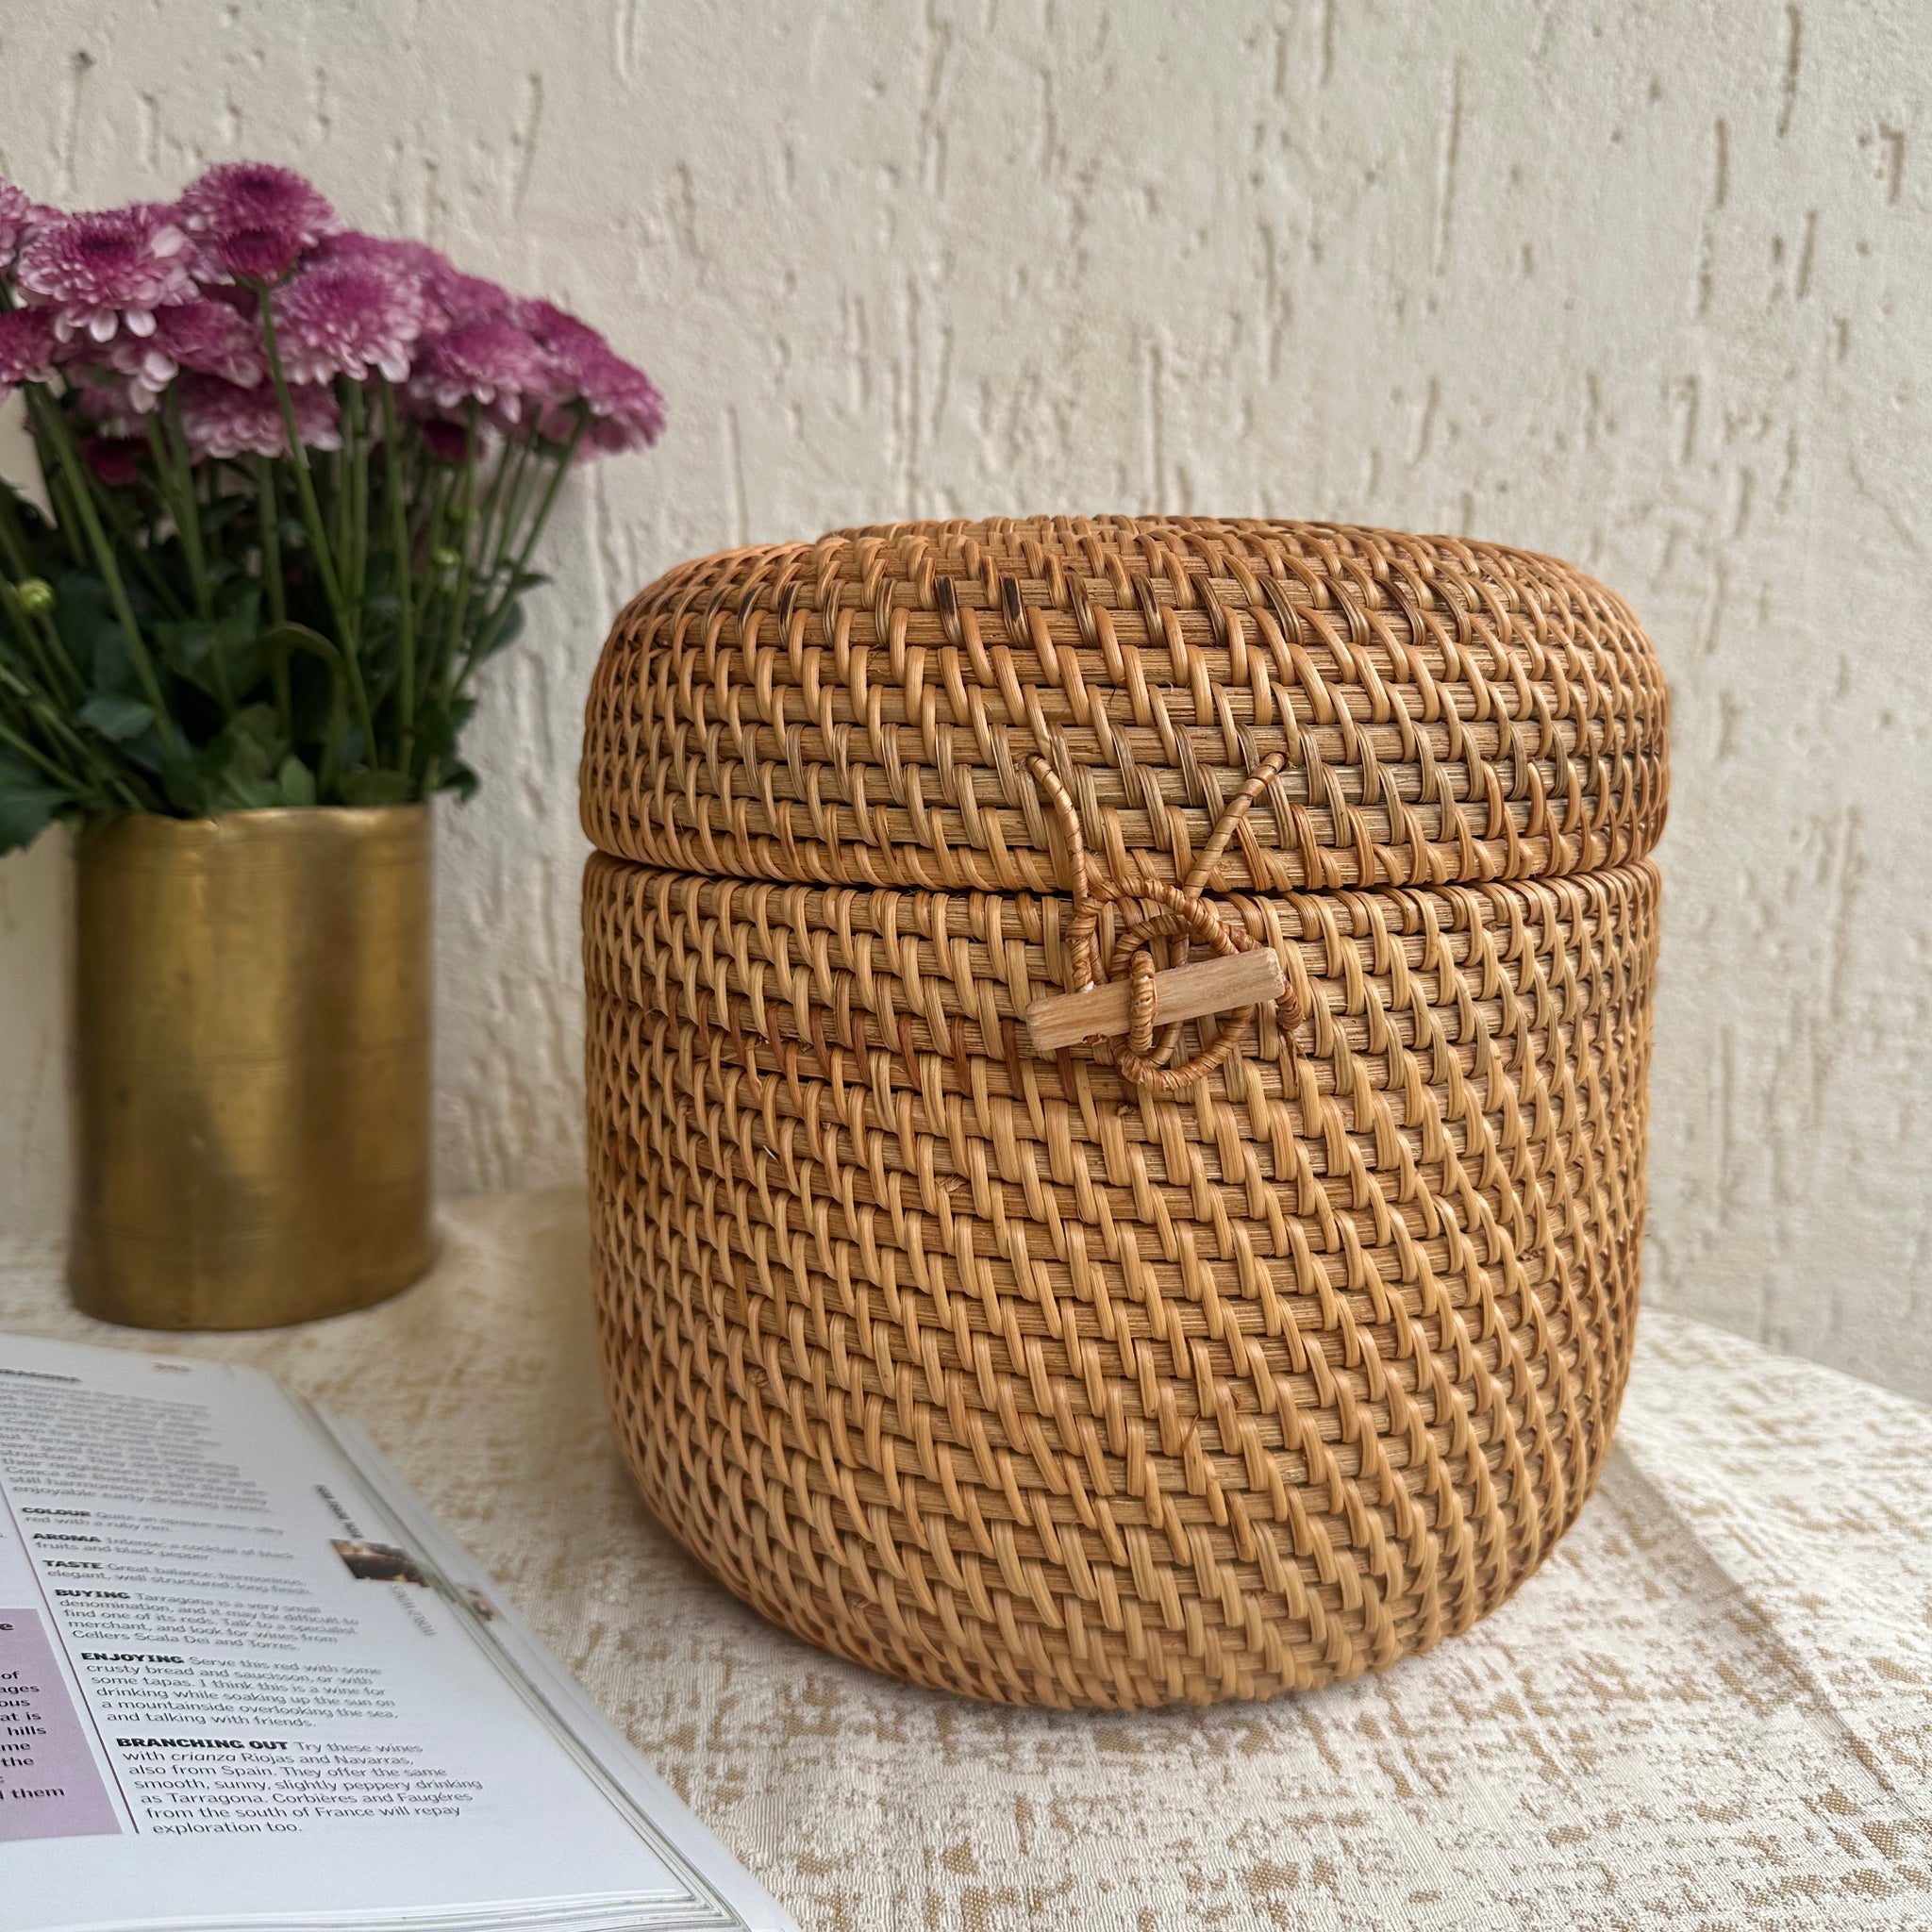 Rattan Storage Box With Lid round for makeup outdoor boho table decor exclusive collection.Enhance your Dream Home with our curated selection of premium Home Décor items.  A rattan storage box is a versatile and stylish piece of furniture that can add both functionality and aesthetic appeal to any room. Whether you want to declutter your living space, organize your outdoor area, or simply add a decorative touch, a rattan storage box can be an excellent choice. tesu 